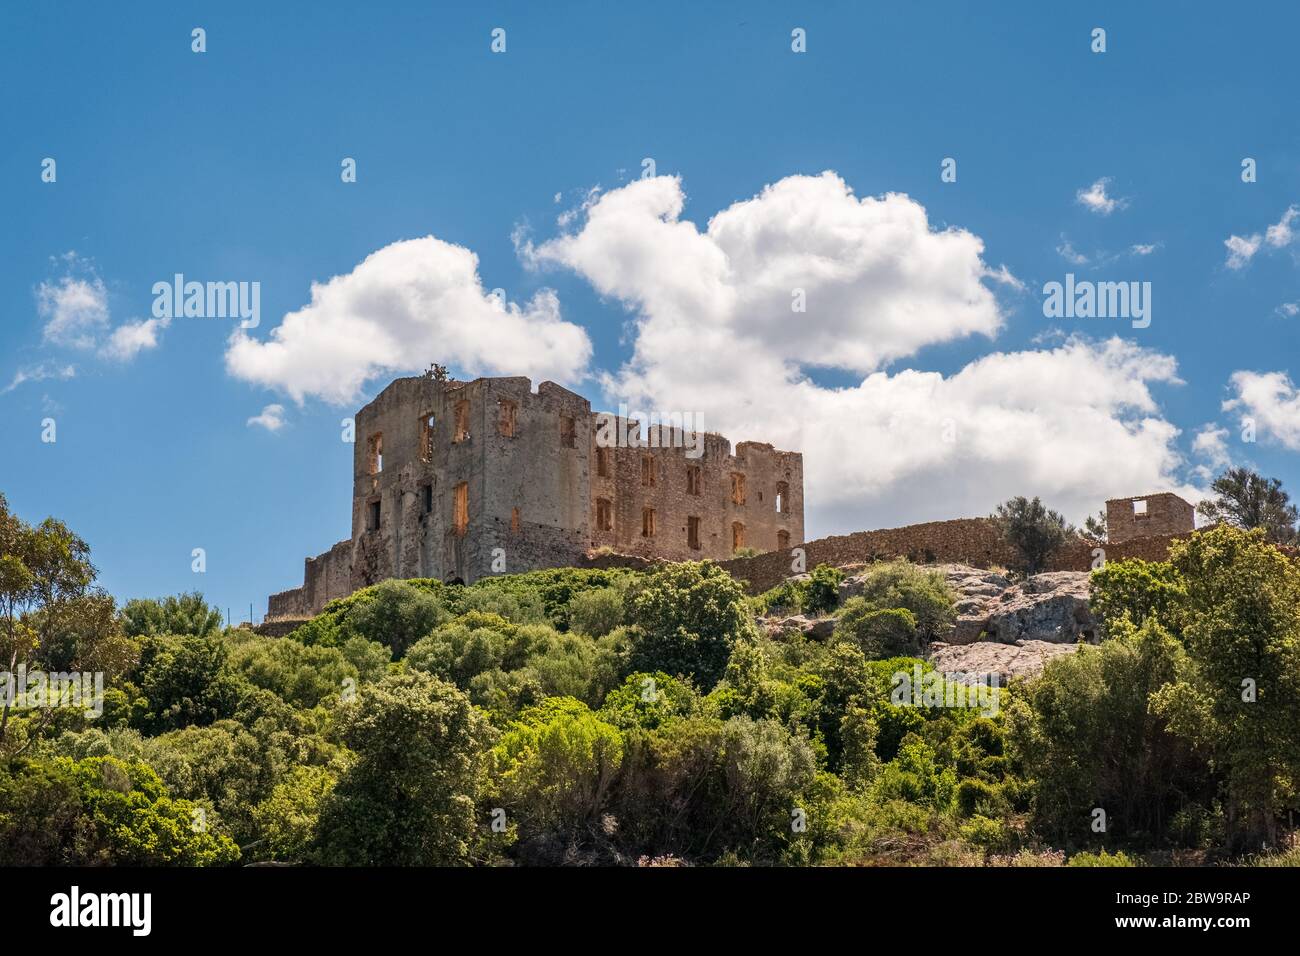 The imposing ruins of the chateau of Pierre-Napoleon Bonaparte at Torre Mozza between Calvi and Galeria in the Balagne region of Corsica Stock Photo